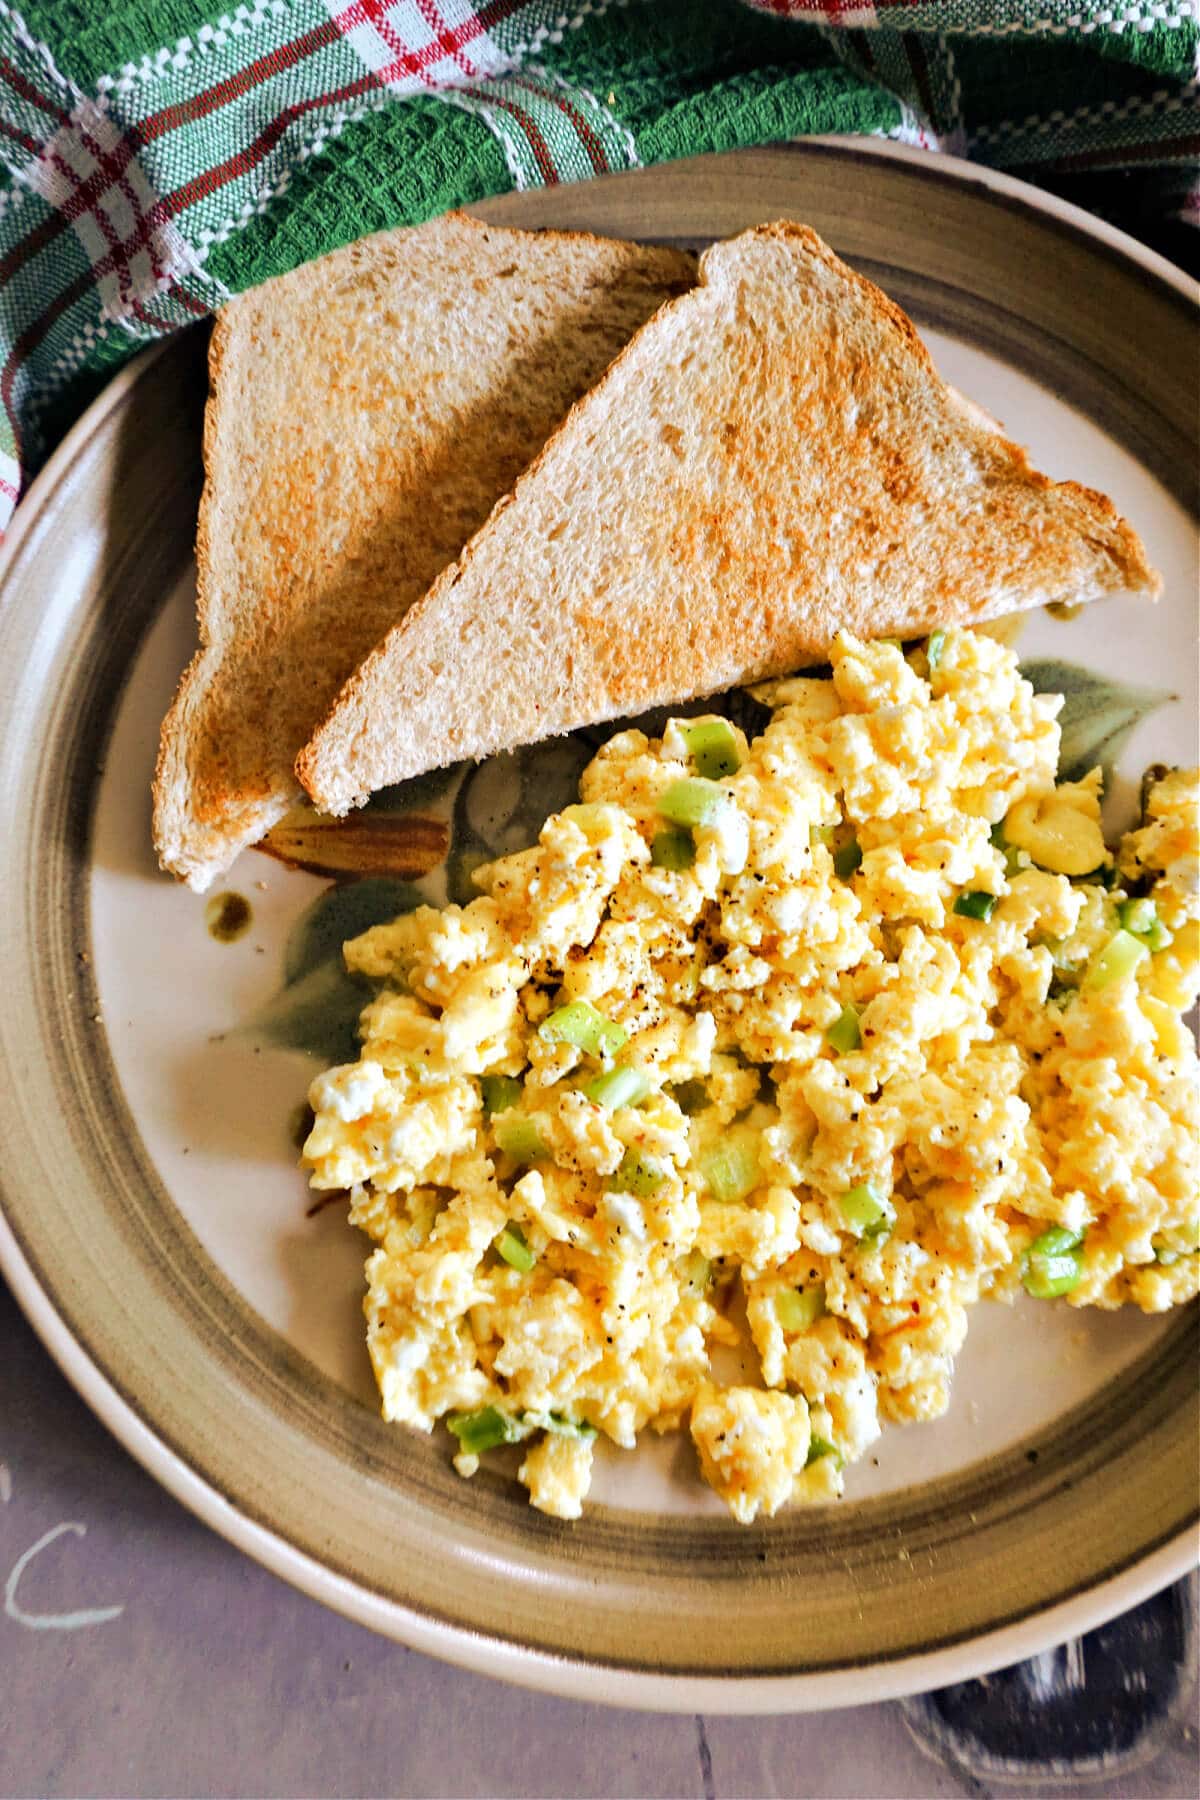 A plate with 2 halves of a toast and scrambled eggs.